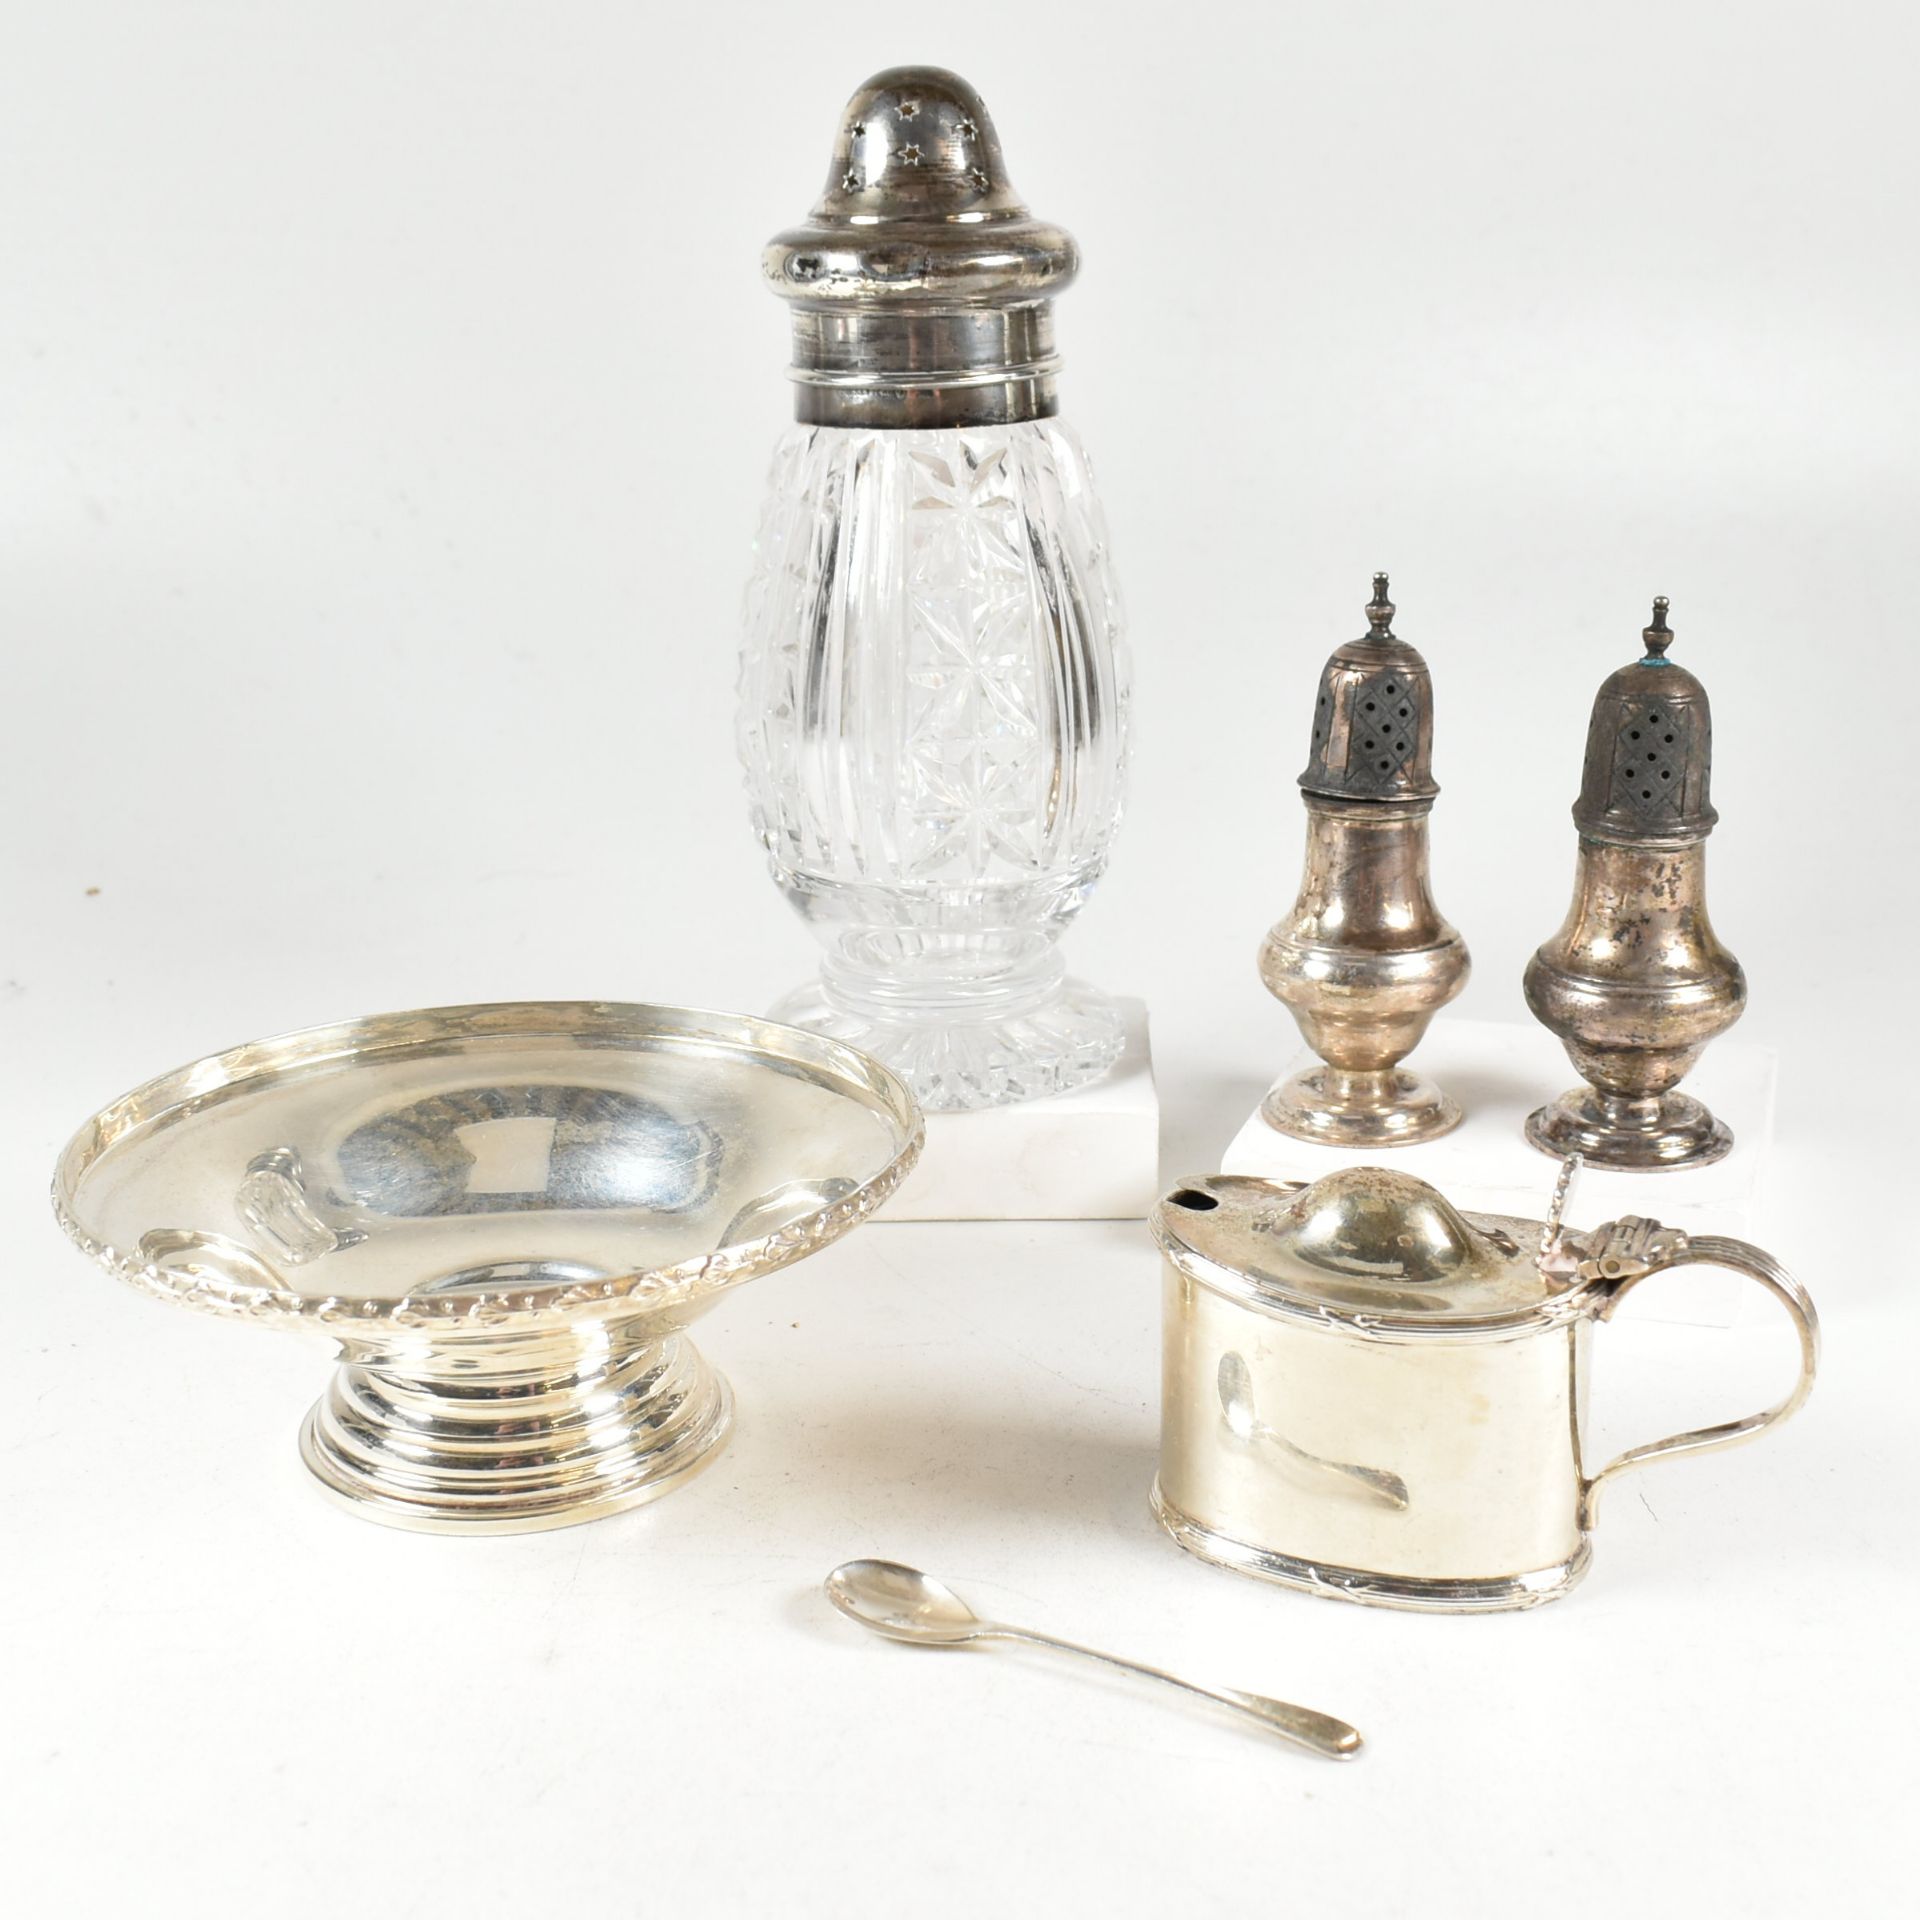 EARLY 20TH CENTURY HALLMARKED SILVER ITEMS